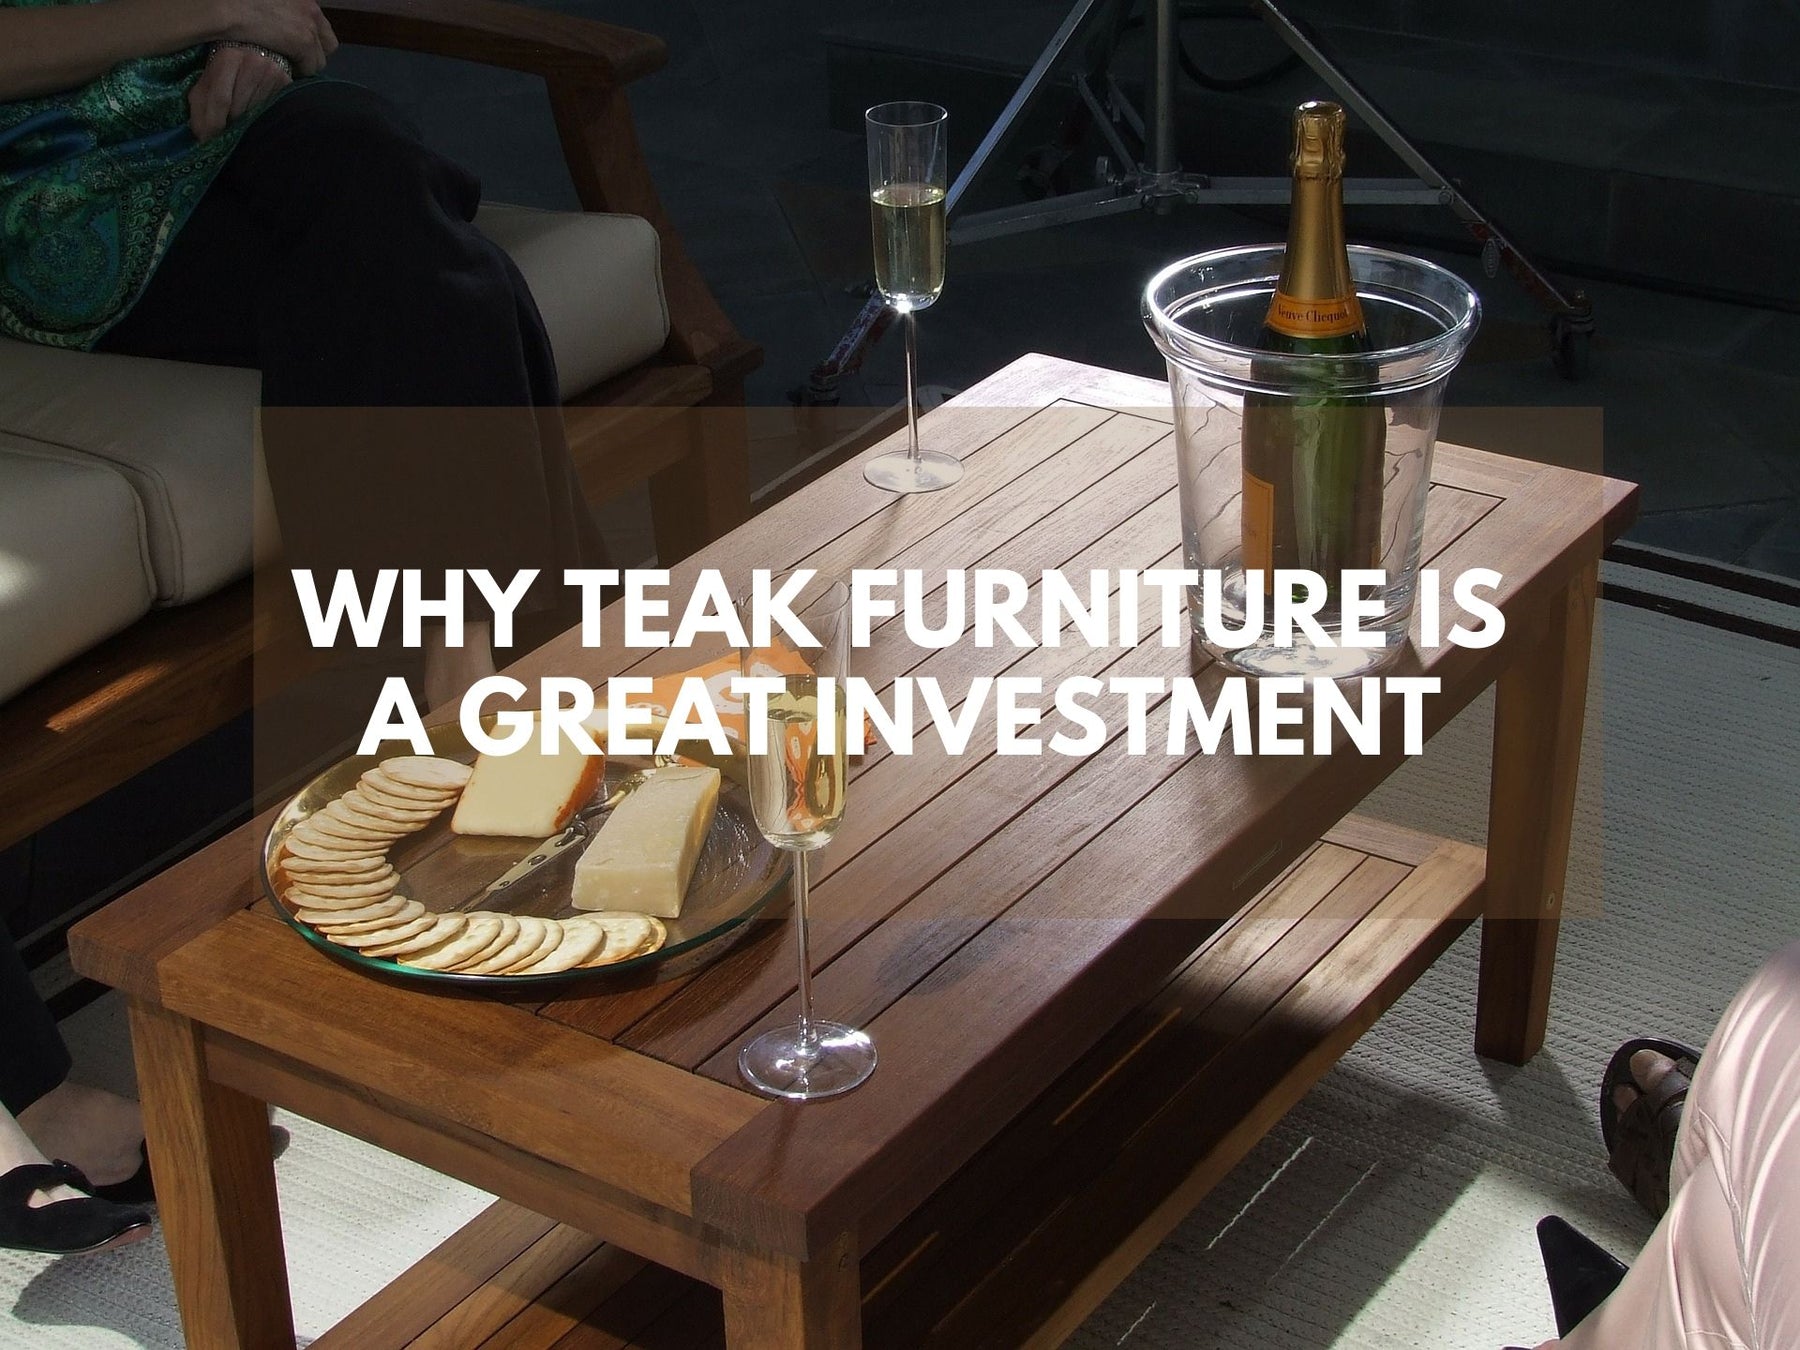 Why Teak Furniture is a Great Investment